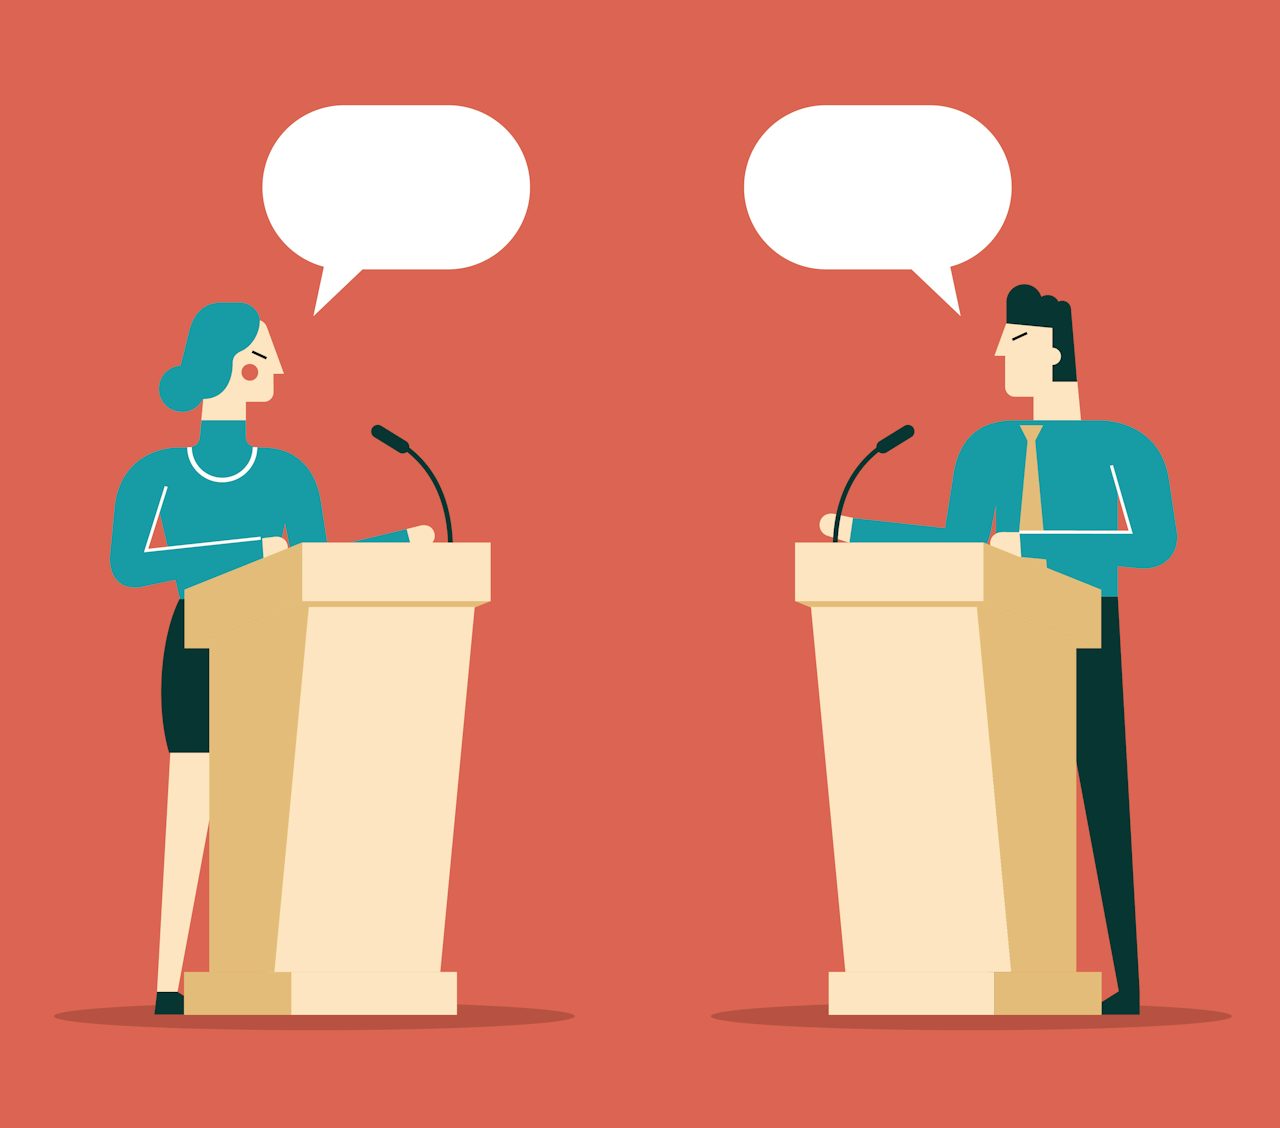 Image with red background depicts two people standing at a podium, one male and one female. They have speech bubbles above their heads. This image is meant to simulate two people debating over a topic.